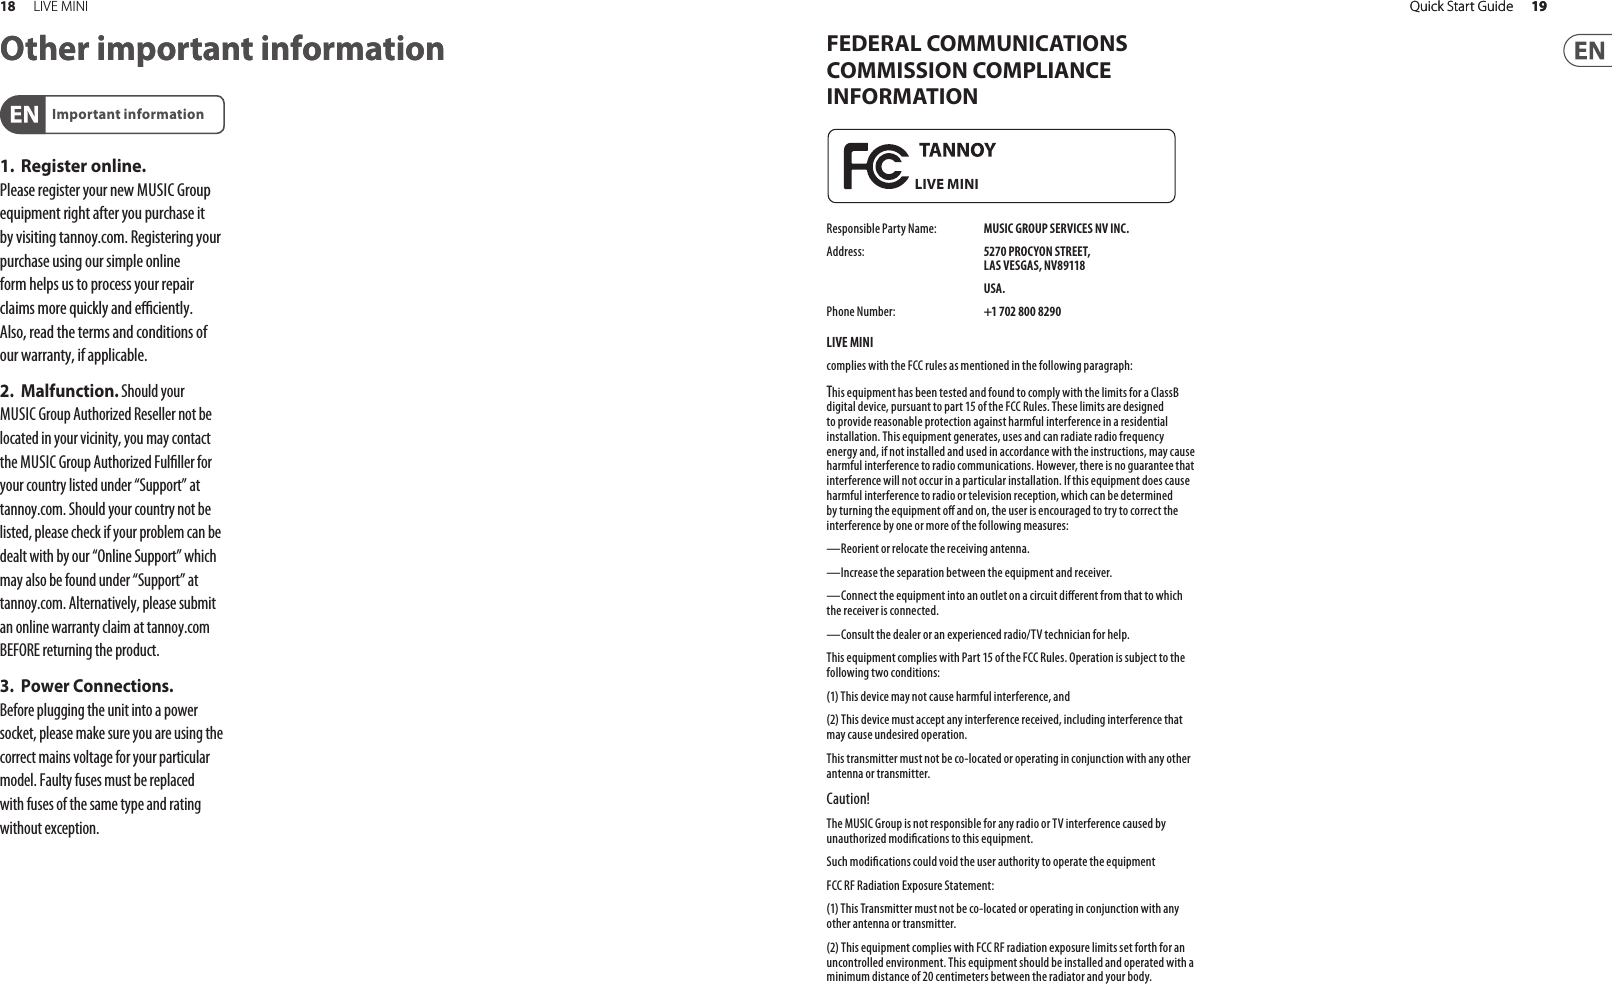 19Quick Start GuideFEDERAL COMMUNICATIONS COMMISSION COMPLIANCE INFORMATIONResponsible Party Name:  MUSIC GROUP SERVICES NV INC.Address:  5270 PROCYON STREET,LAS VESGAS, NV89118 USA.Phone Number:  +1 702 800 8290LIVE MINIcomplies with the FCC rules as mentioned in the following paragraph:This equipment has been tested and found to comply with the limits for a ClassB digital device, pursuant to part 15 of the FCC Rules. These limits are designed to provide reasonable protection against harmful interference in a residential installation. This equipment generates, uses and can radiate radio frequency energy and, if not installed and used in accordance with the instructions, may cause harmful interference to radio communications. However, there is no guarantee that interference will not occur in a particular installation. If this equipment does cause harmful interference to radio or television reception, which can be determined by turning the equipment o  and on, the user is encouraged to try to correct the interference by one or more of the following measures:—Reorient or relocate the receiving antenna.—Increase the separation between the equipment and receiver.—Connect the equipment into an outlet on a circuit di erent from that to which the receiver is connected.—Consult the dealer or an experienced radio/TV technician for help.This equipment complies with Part 15 of the FCC Rules. Operation is subject to the following two conditions:(1) This device may not cause harmful interference, and(2) This device must accept any interference received, including interference that may cause undesired operation.This transmitter must not be co-located or operating in conjunction with any other antenna or transmitter.Caution!The MUSIC Group is not responsible for any radio or TV interference caused by unauthorized modi cations to this equipment.Such modi cations could void the user authority to operate the equipmentFCC RF Radiation Exposure Statement:(1) This Transmitter must not be co-located or operating in conjunction with any other antenna or transmitter.(2) This equipment complies with FCC RF radiation exposure limits set forth for an uncontrolled environment. This equipment should be installed and operated with a minimum distance of 20 centimeters between the radiator and your body.LIVE MINI19Quick Start Guide18 LIVE MINIOther important information1. Register online. Pleaseregister your new MUSIC Group equipment right after you purchase it by visiting tannoy.com. Registeringyour purchase using our simple online form helps us to process your repair claims more quickly and e  ciently. Also, read the terms and conditions of our warranty, ifapplicable.2. Malfunction. Should your MUSICGroup Authorized Reseller not be located in your vicinity, you may contact the MUSIC Group Authorized Ful ller for your country listed under “Support” at tannoy.com. Shouldyour country not be listed, pleasecheck if your problem can be dealt with by our “OnlineSupport” which may also be found under “Support” at tannoy.com. Alternatively, please submit an online warranty claim at tannoy.com BEFORE returning theproduct.3. Power Connections. Beforeplugging the unit into a power socket, please make sure you are using the correct mains voltage for your particular model. Faulty fuses must be replaced with fuses of the same type and rating withoutexception.Important informationOther important information